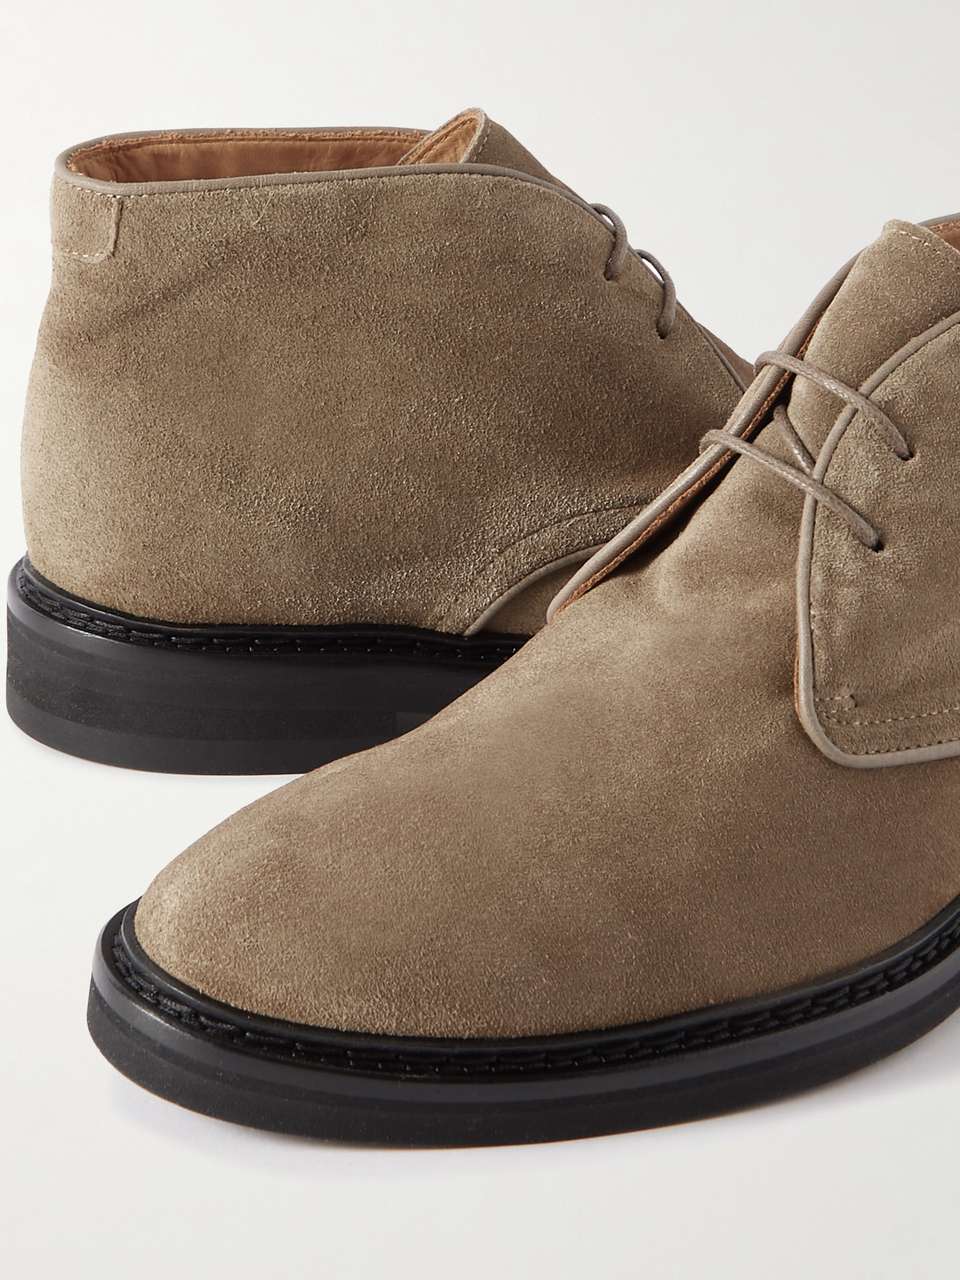 MR P. Lucien Regenerated Suede by evolo® Desert Boots | MR PORTER